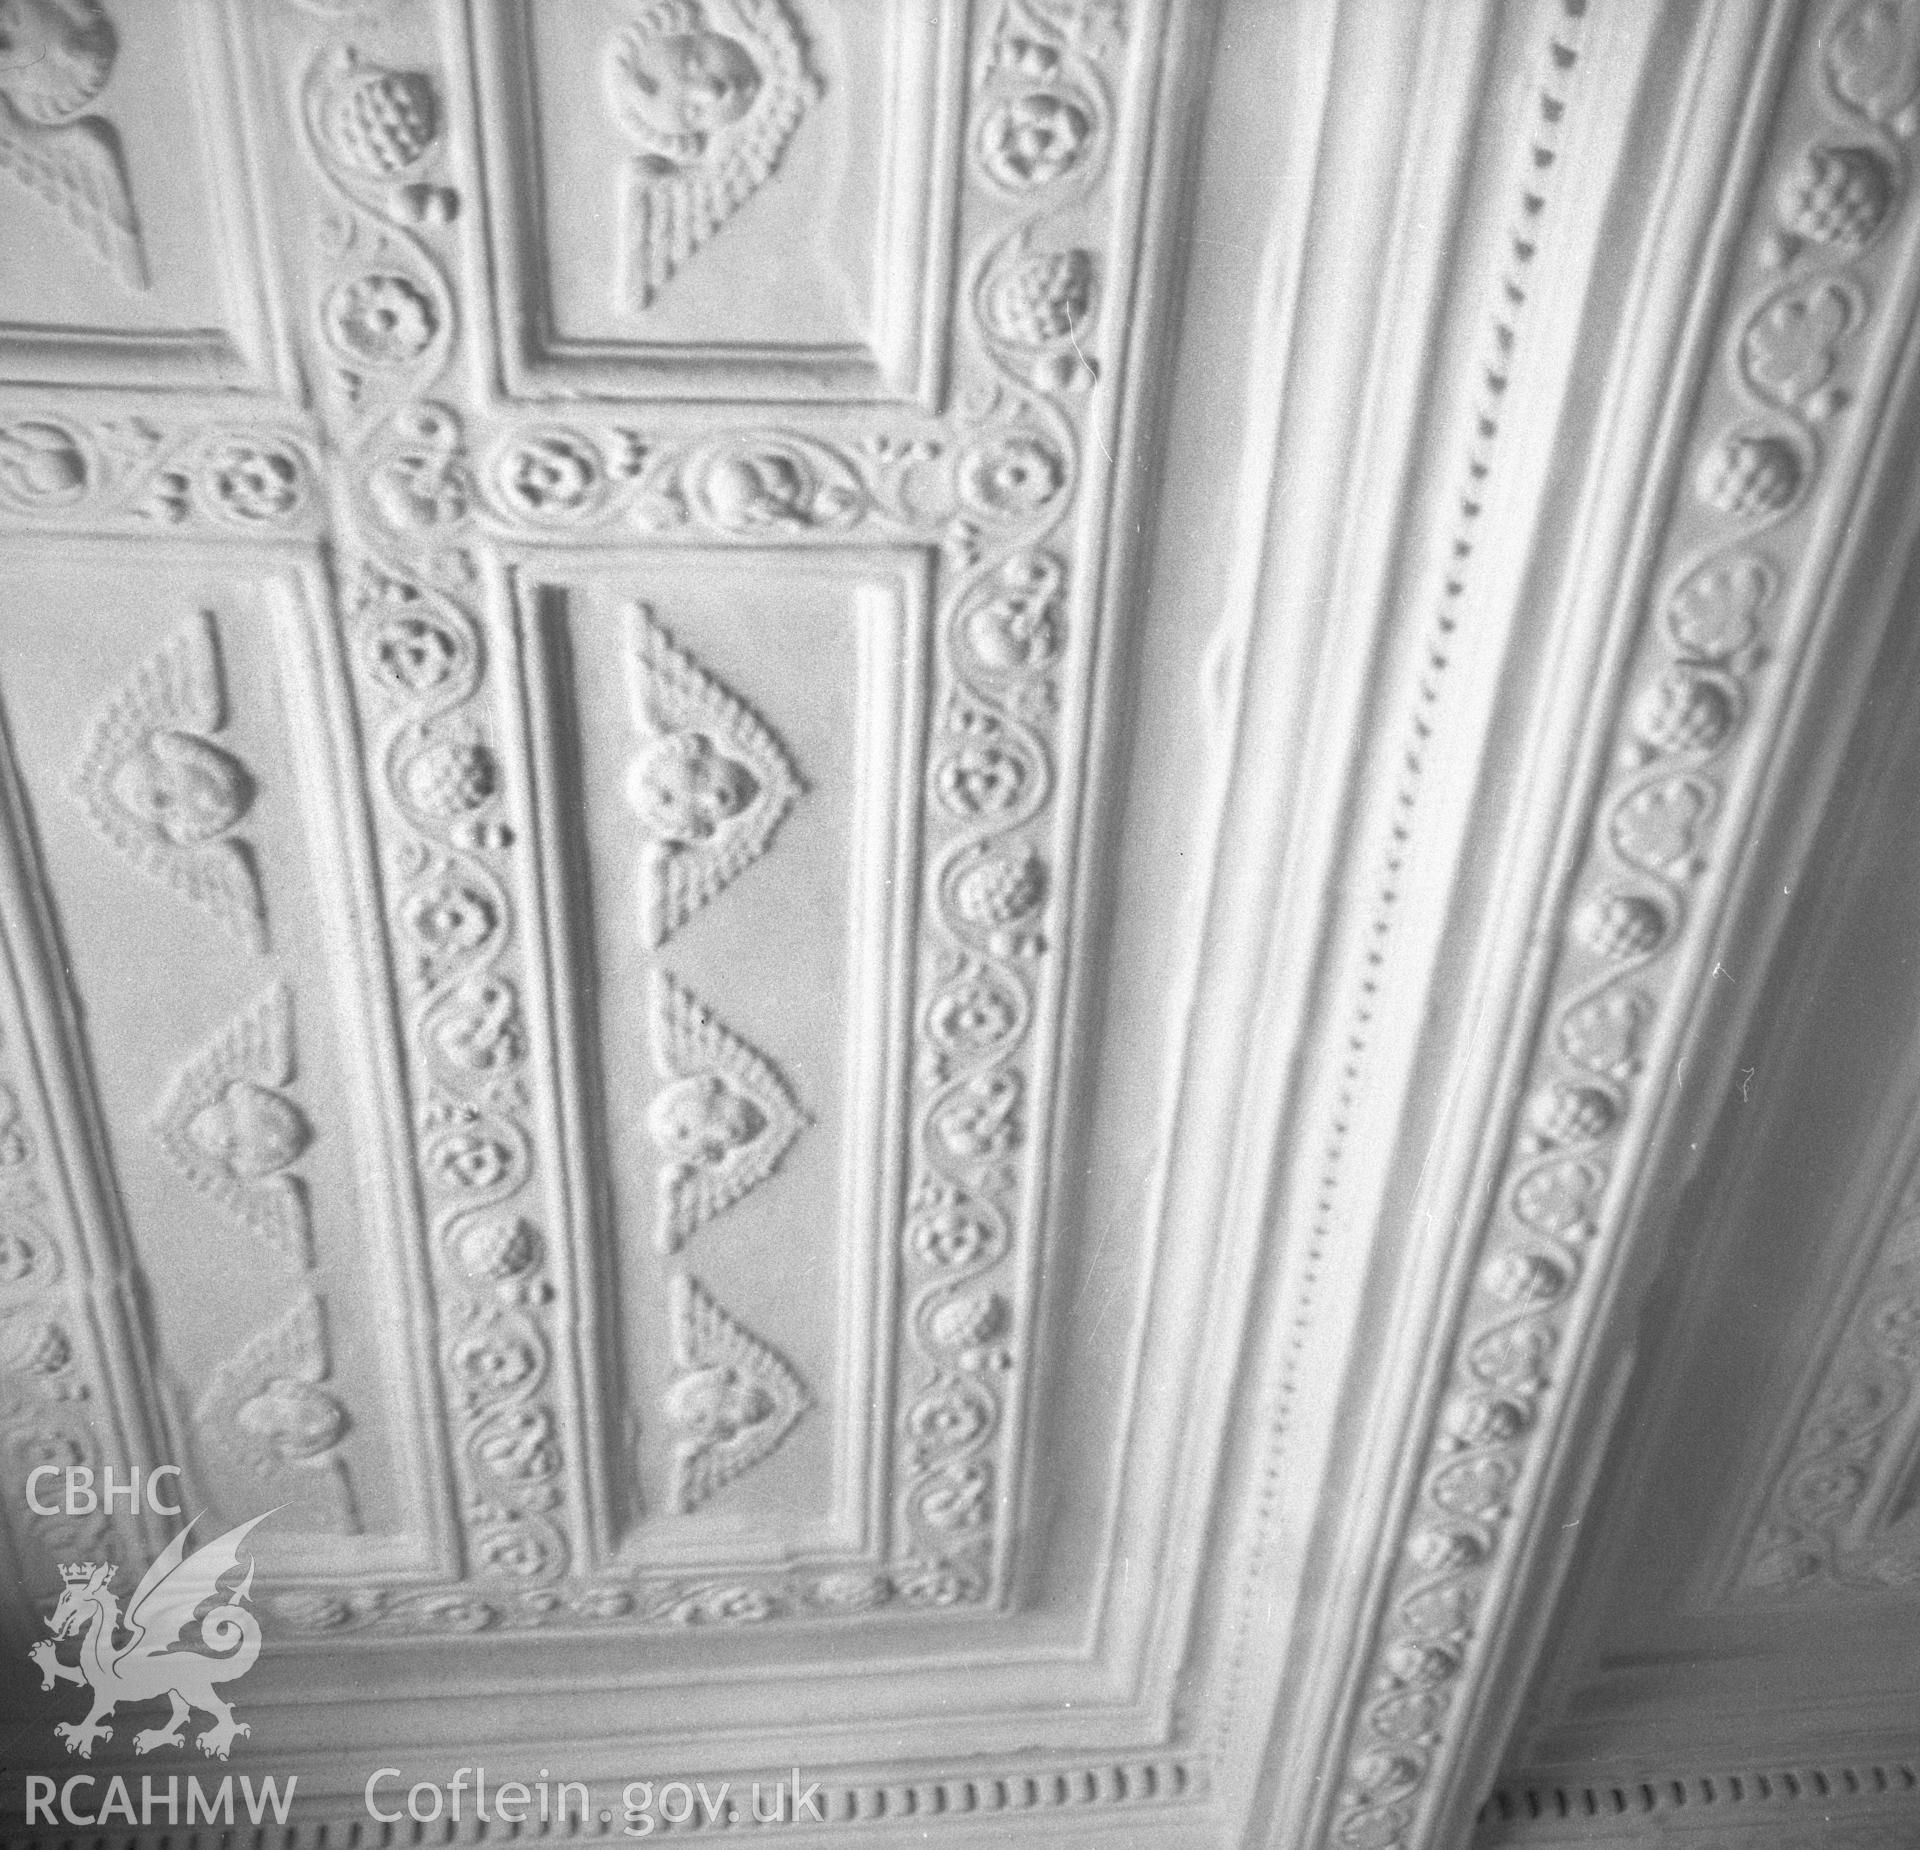 Digital copy of an undated nitrate negative showing ceiling decoration at 40 Cross Street,  Abergavenny.